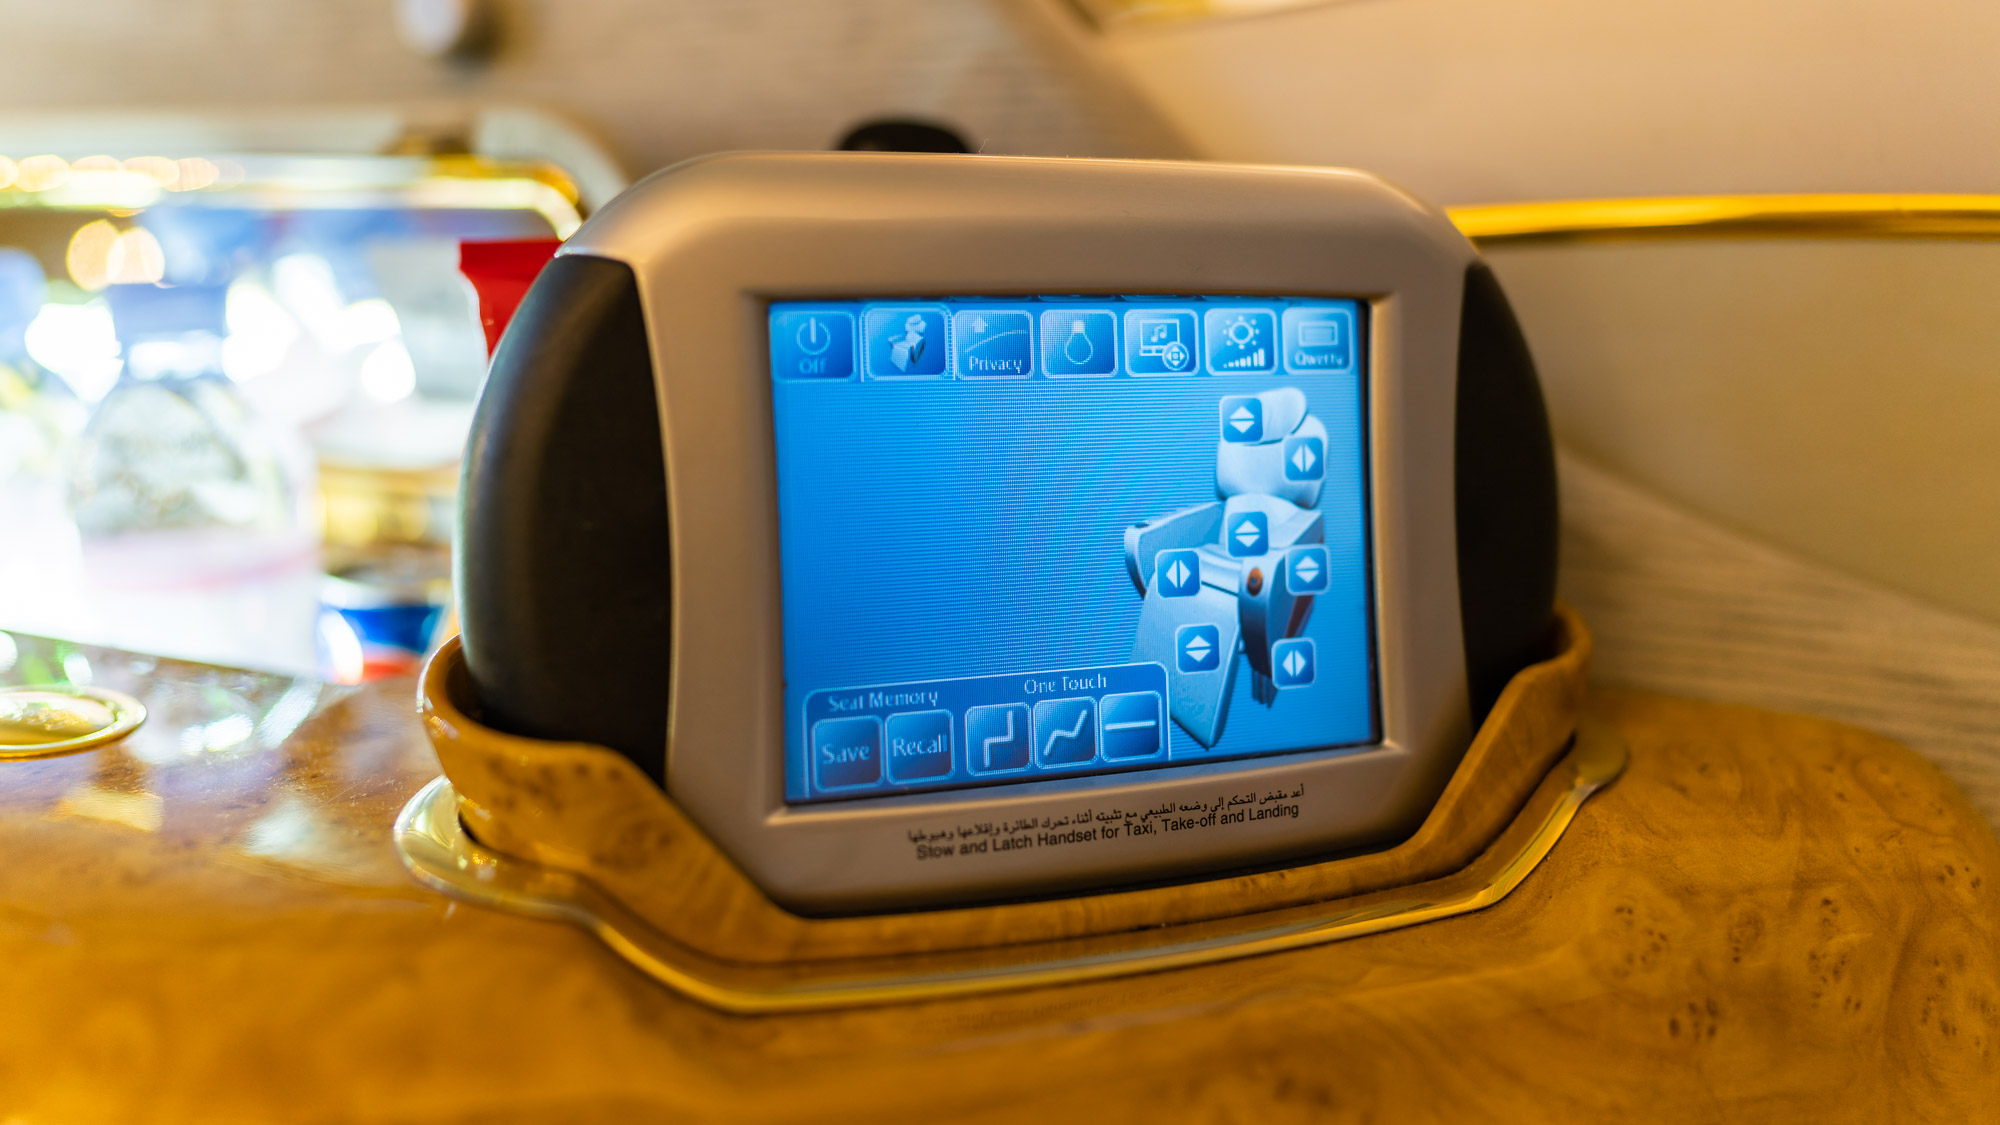 Emirates Boeing 777 First class seat tablet